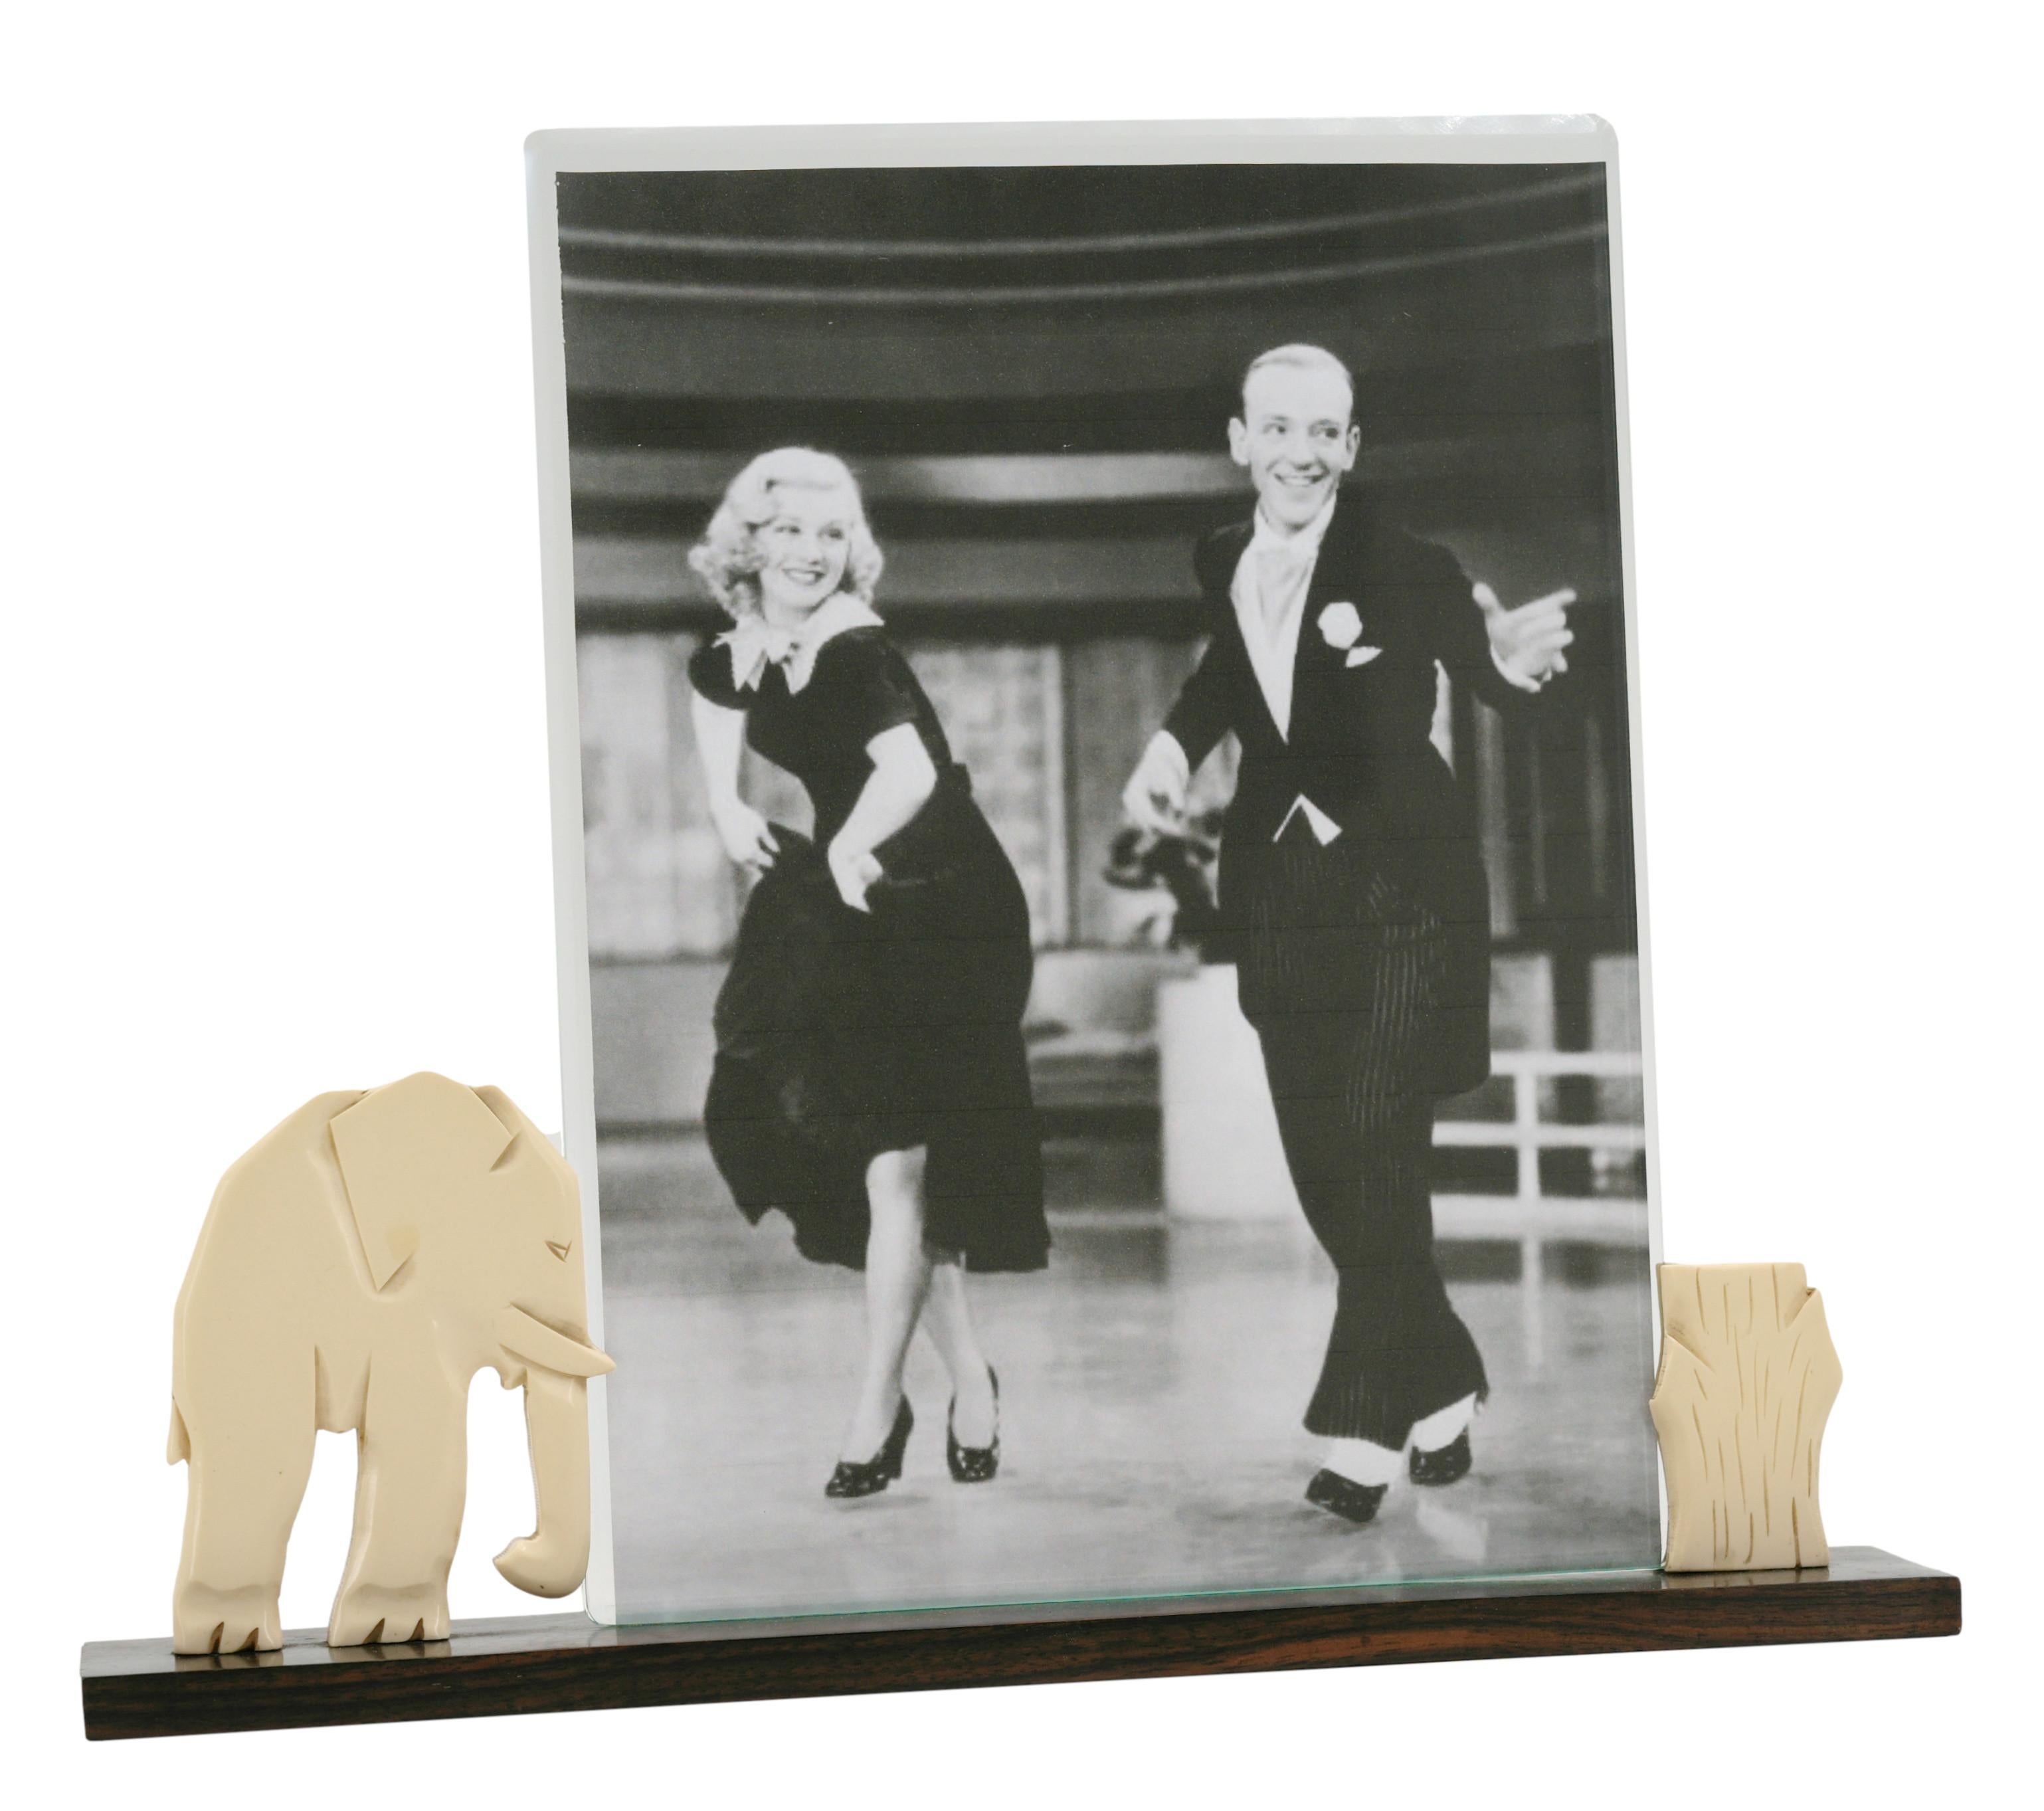 French Art Deco photo frame, France, 1930s. Elephant. Macassar, bakelite & glass. Original beveled glass. Overall dimensions : 25x30x4,5 cm - 9.85x11.8x1.8 inches. Largest photo dimensions : 24x18 cm - 9.45x7.1 inches. Very good condition.